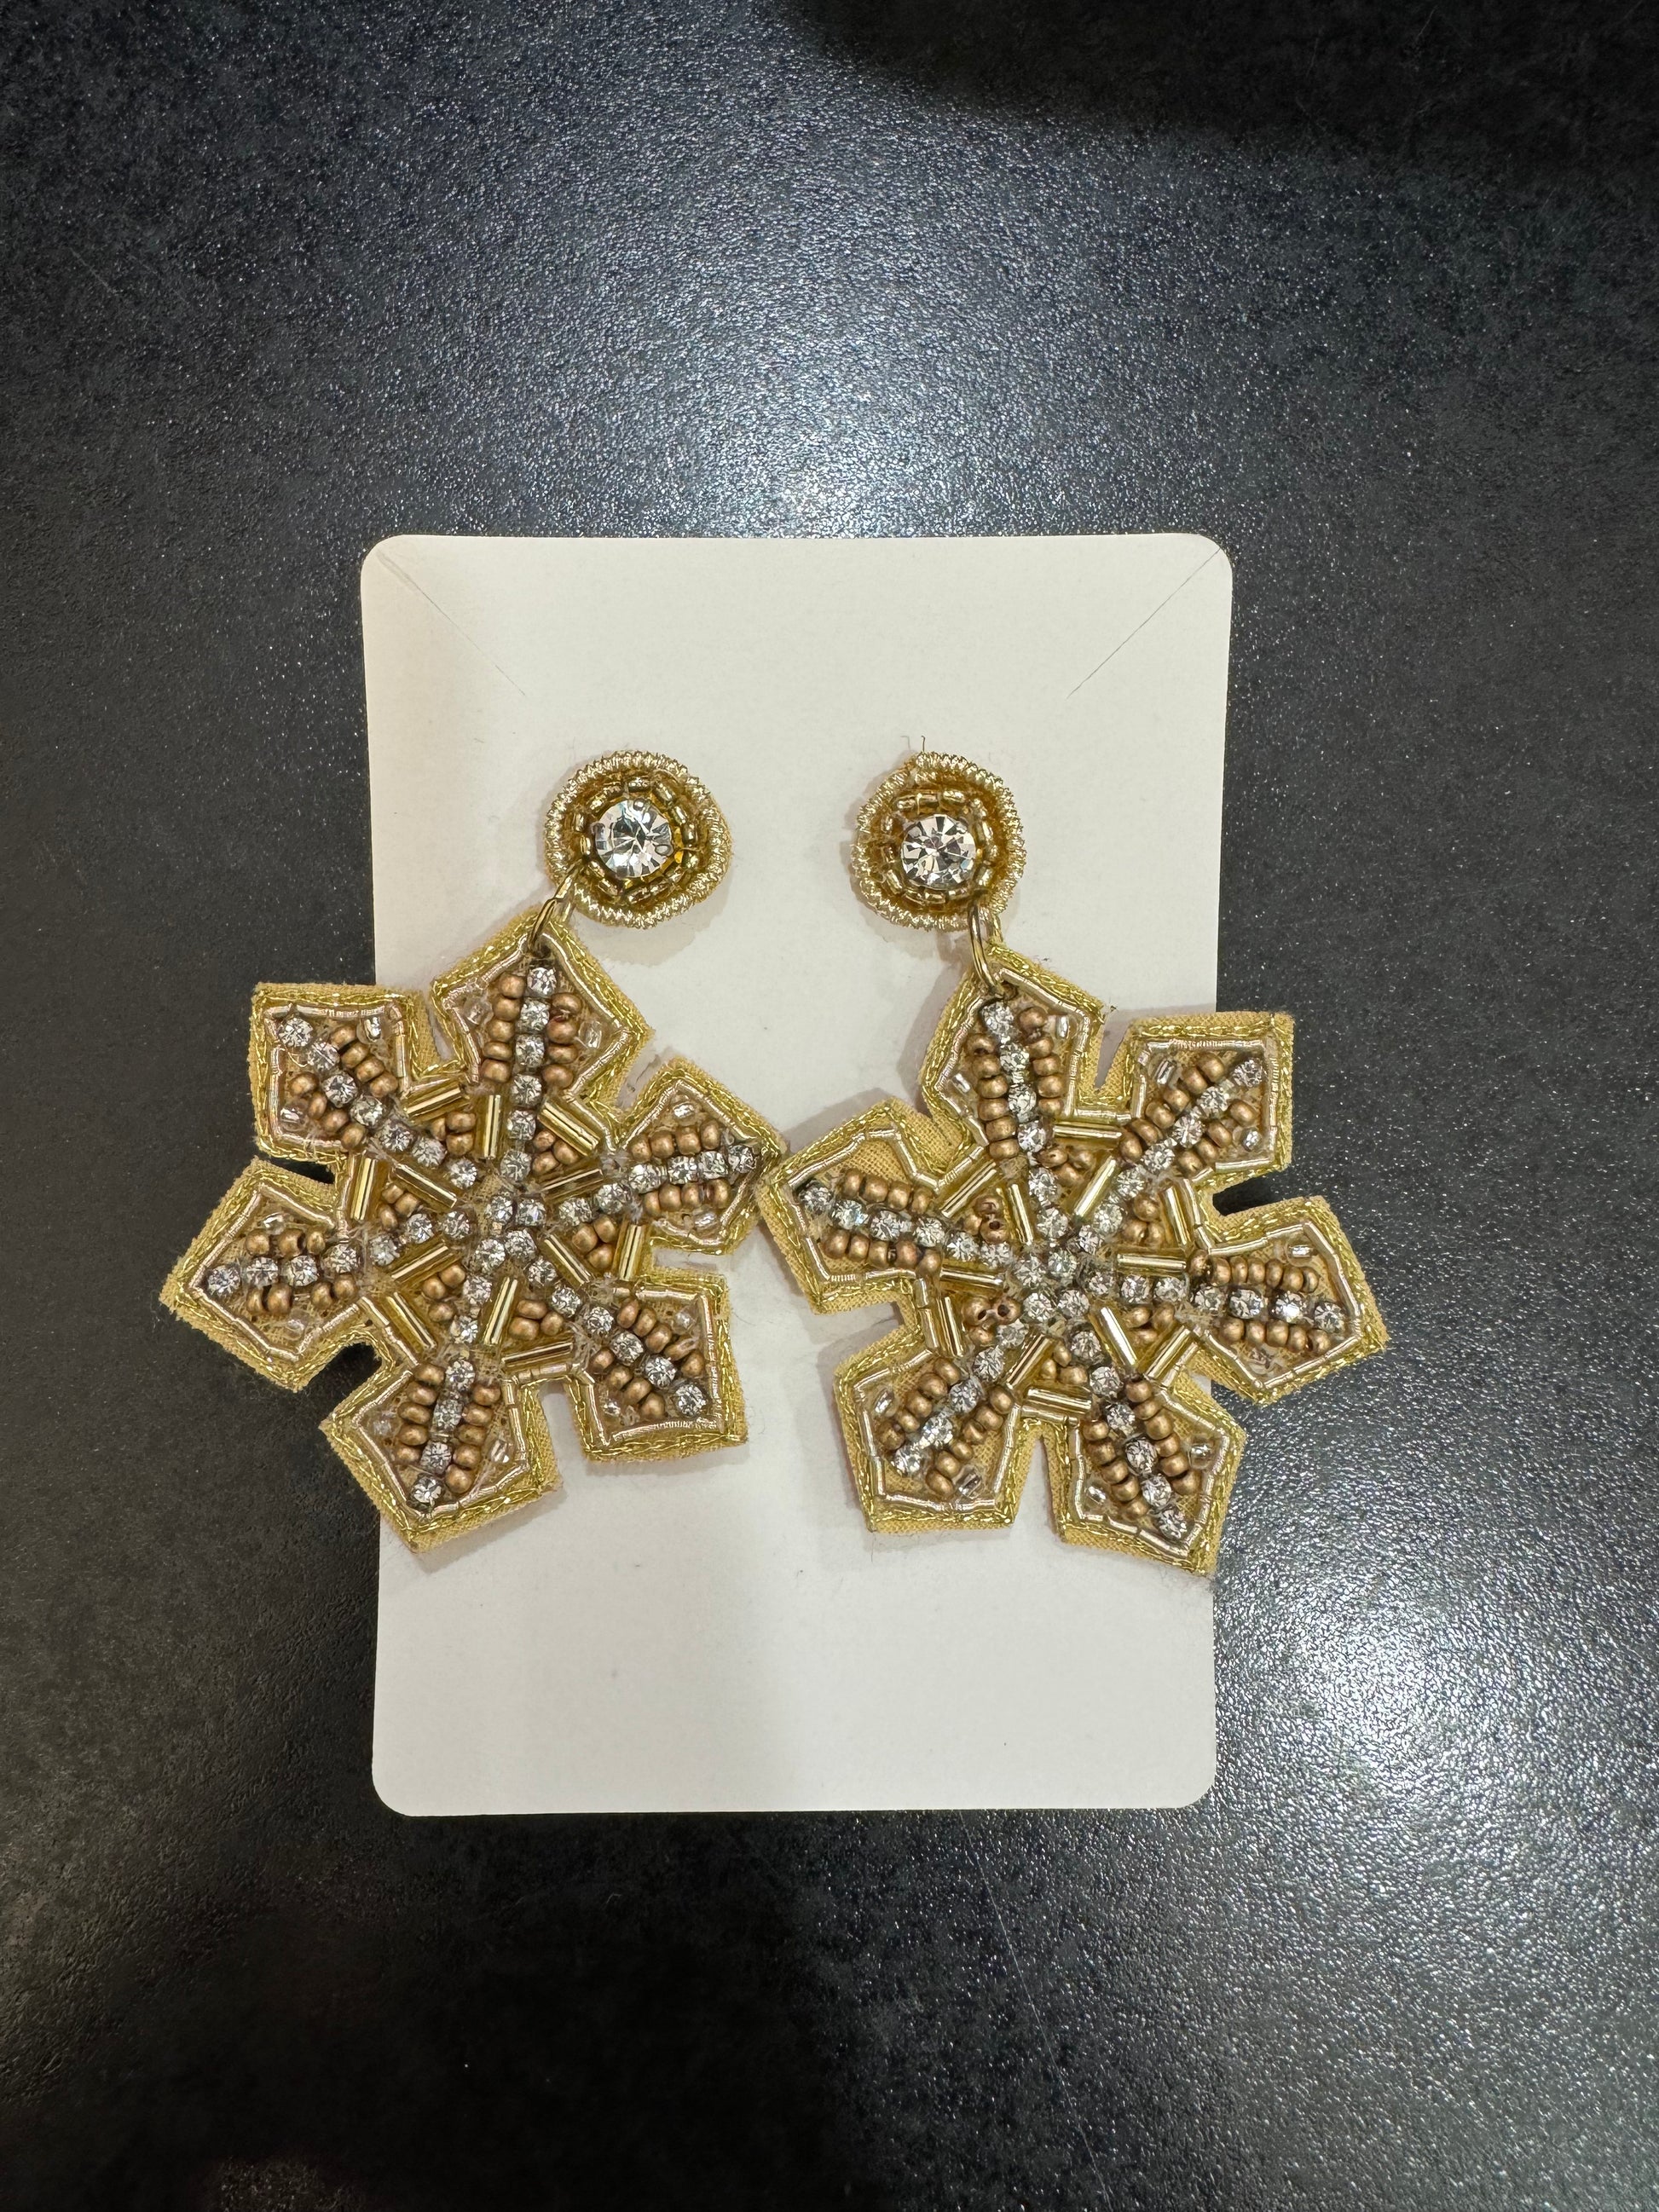 A pair of Gold Beaded Snowflake Earrings by Chickie Collective on a white background.